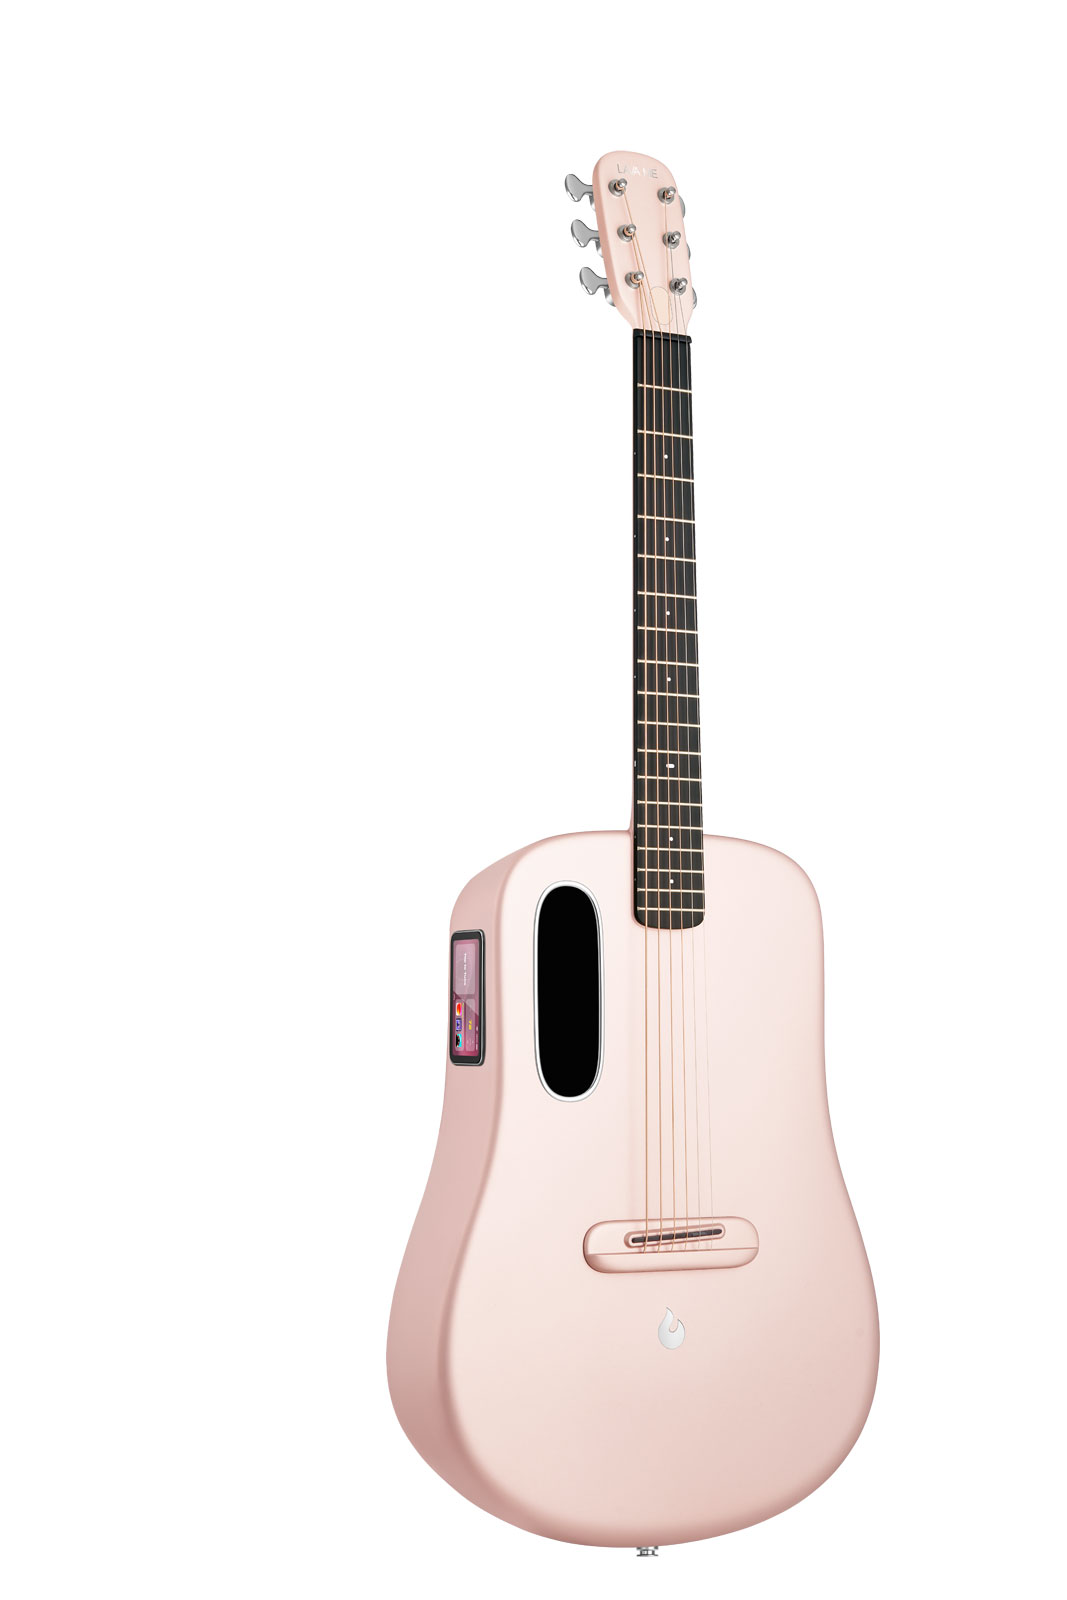 LAVA MUSIC LAVA ME 4 CARBON SERIES 38'' PINK - WITH AIRFLOW BAG